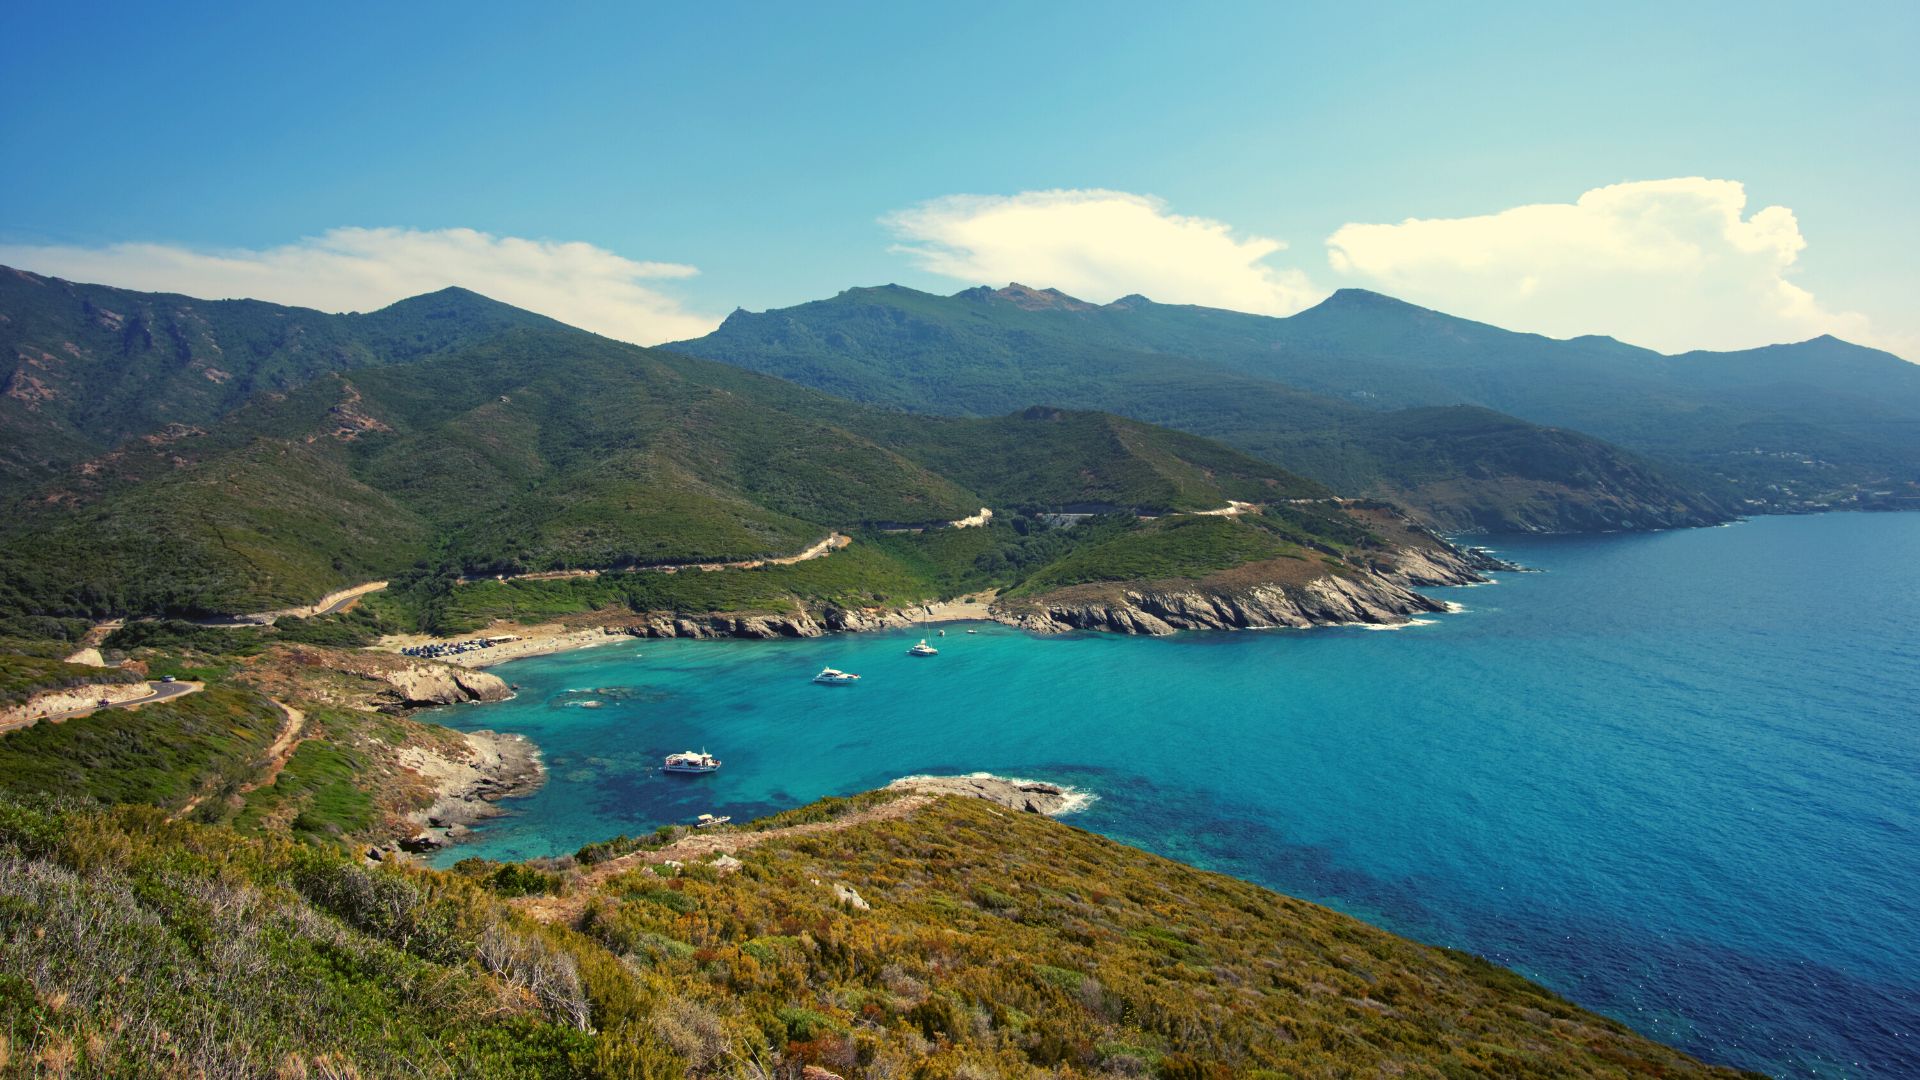 Self-guided motorcycle tour sardinia and corsica